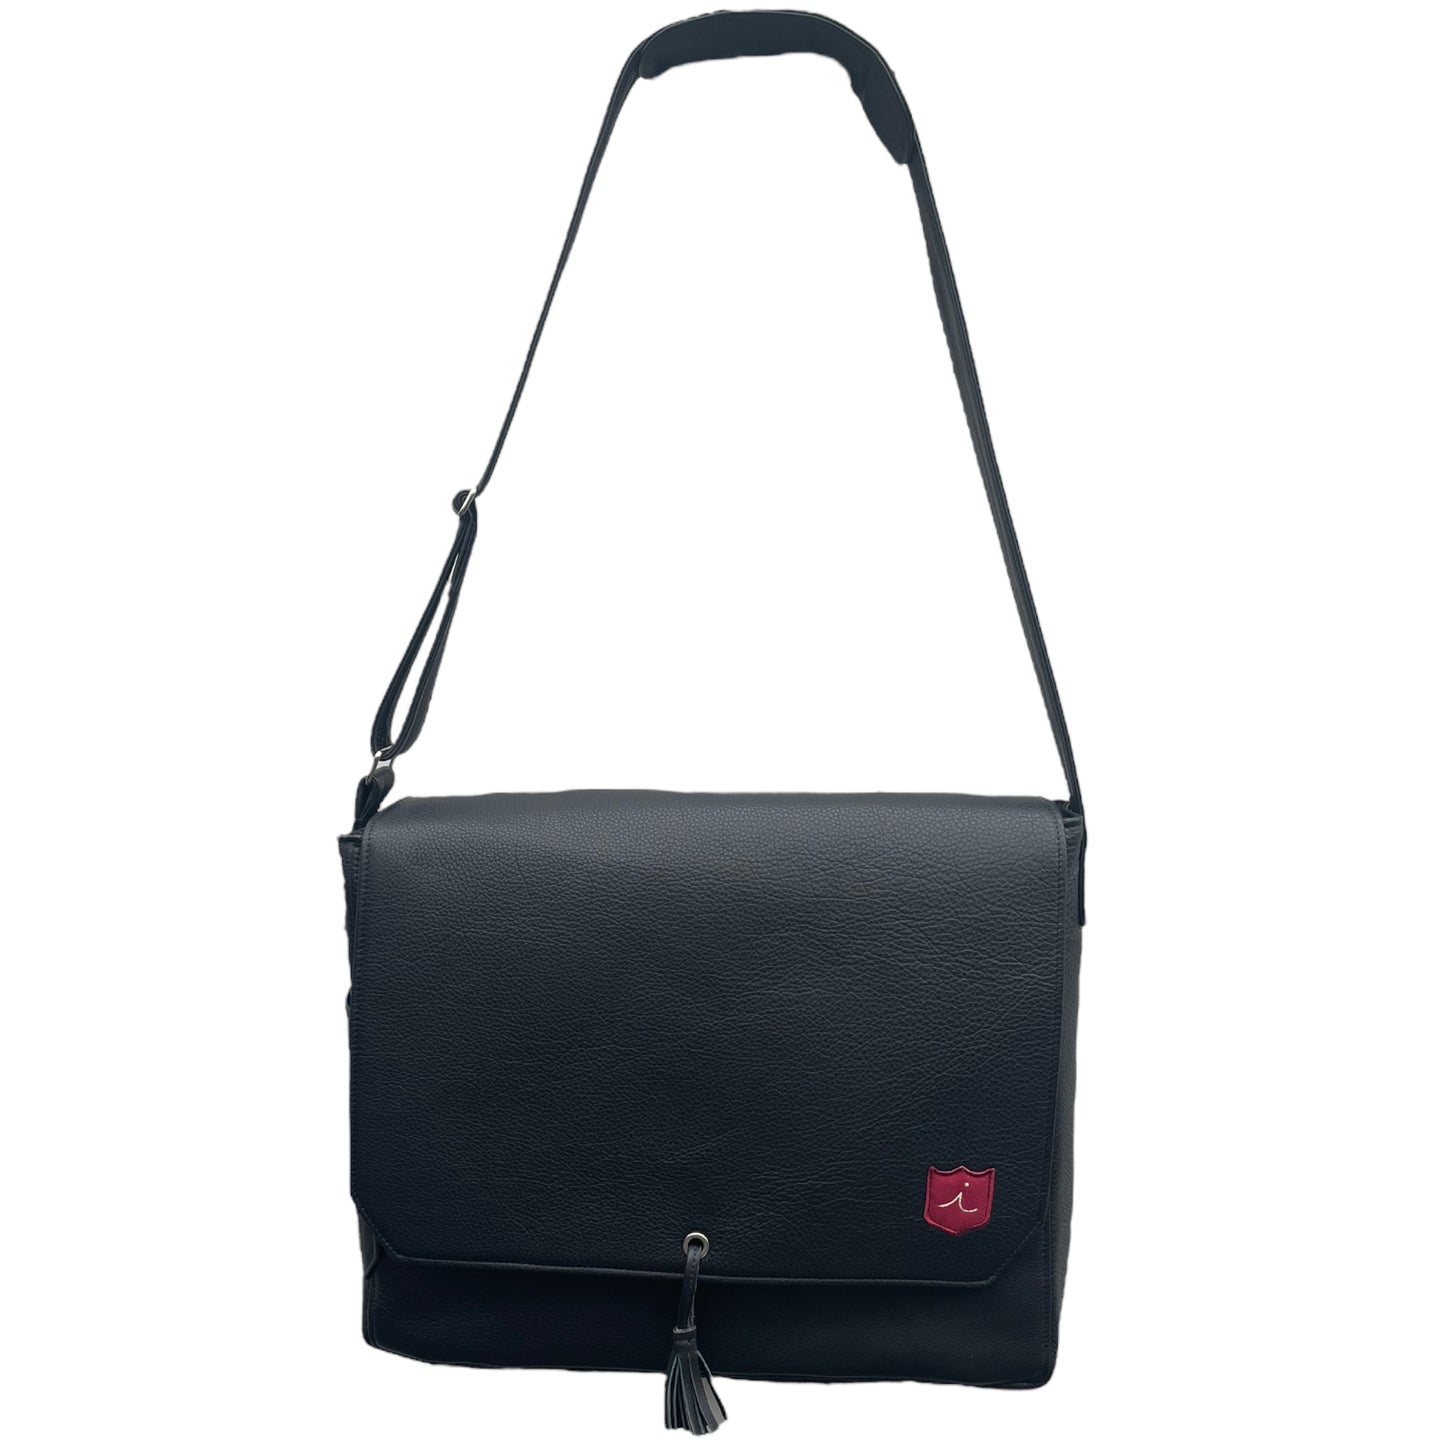 Traditional Computer Bag: Pitch Black